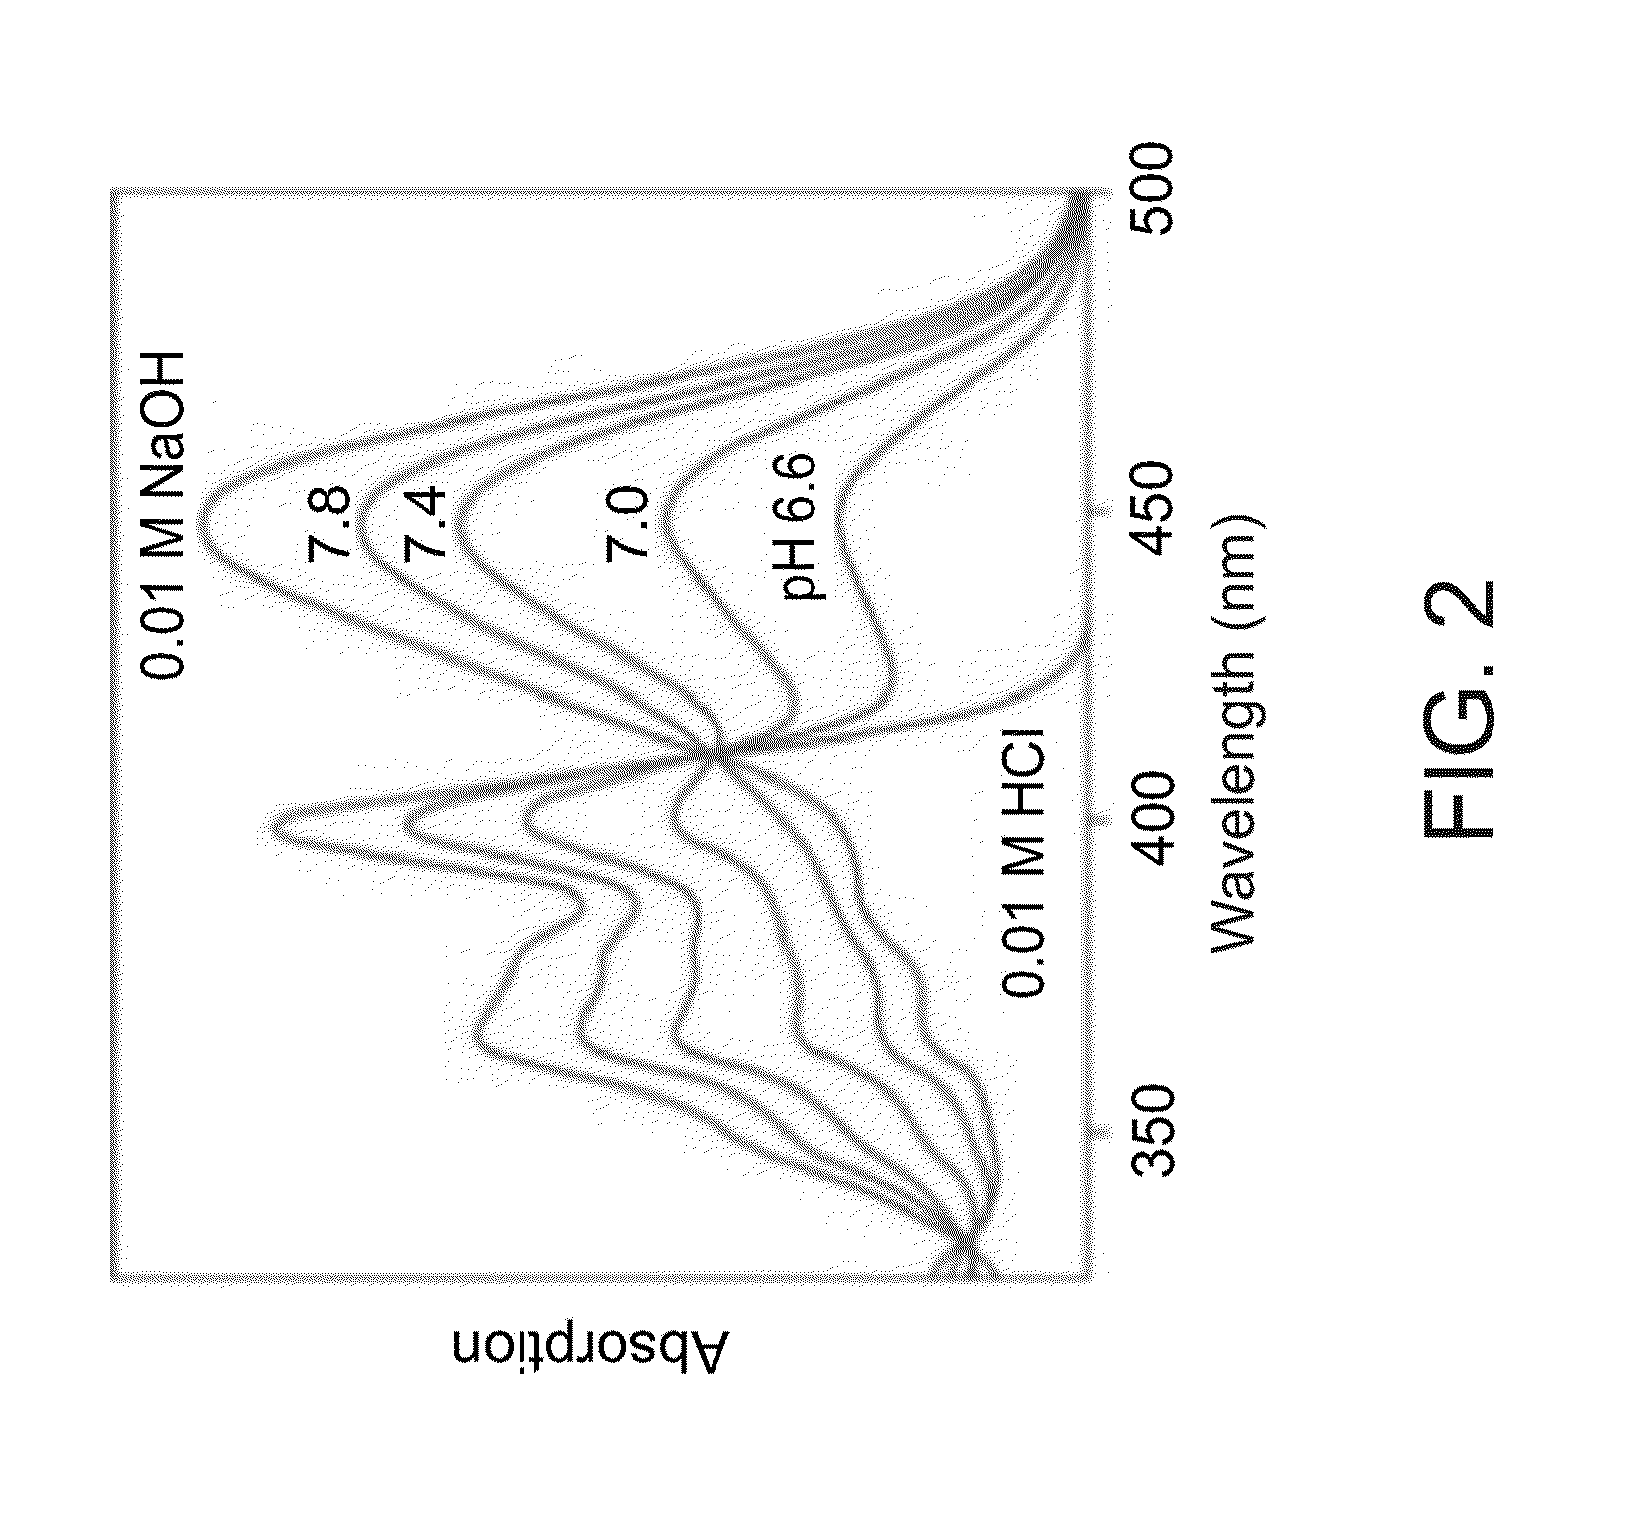 Methods of monitoring and analyzing metabolic activity profiles diagnostic and therapeutic uses of same